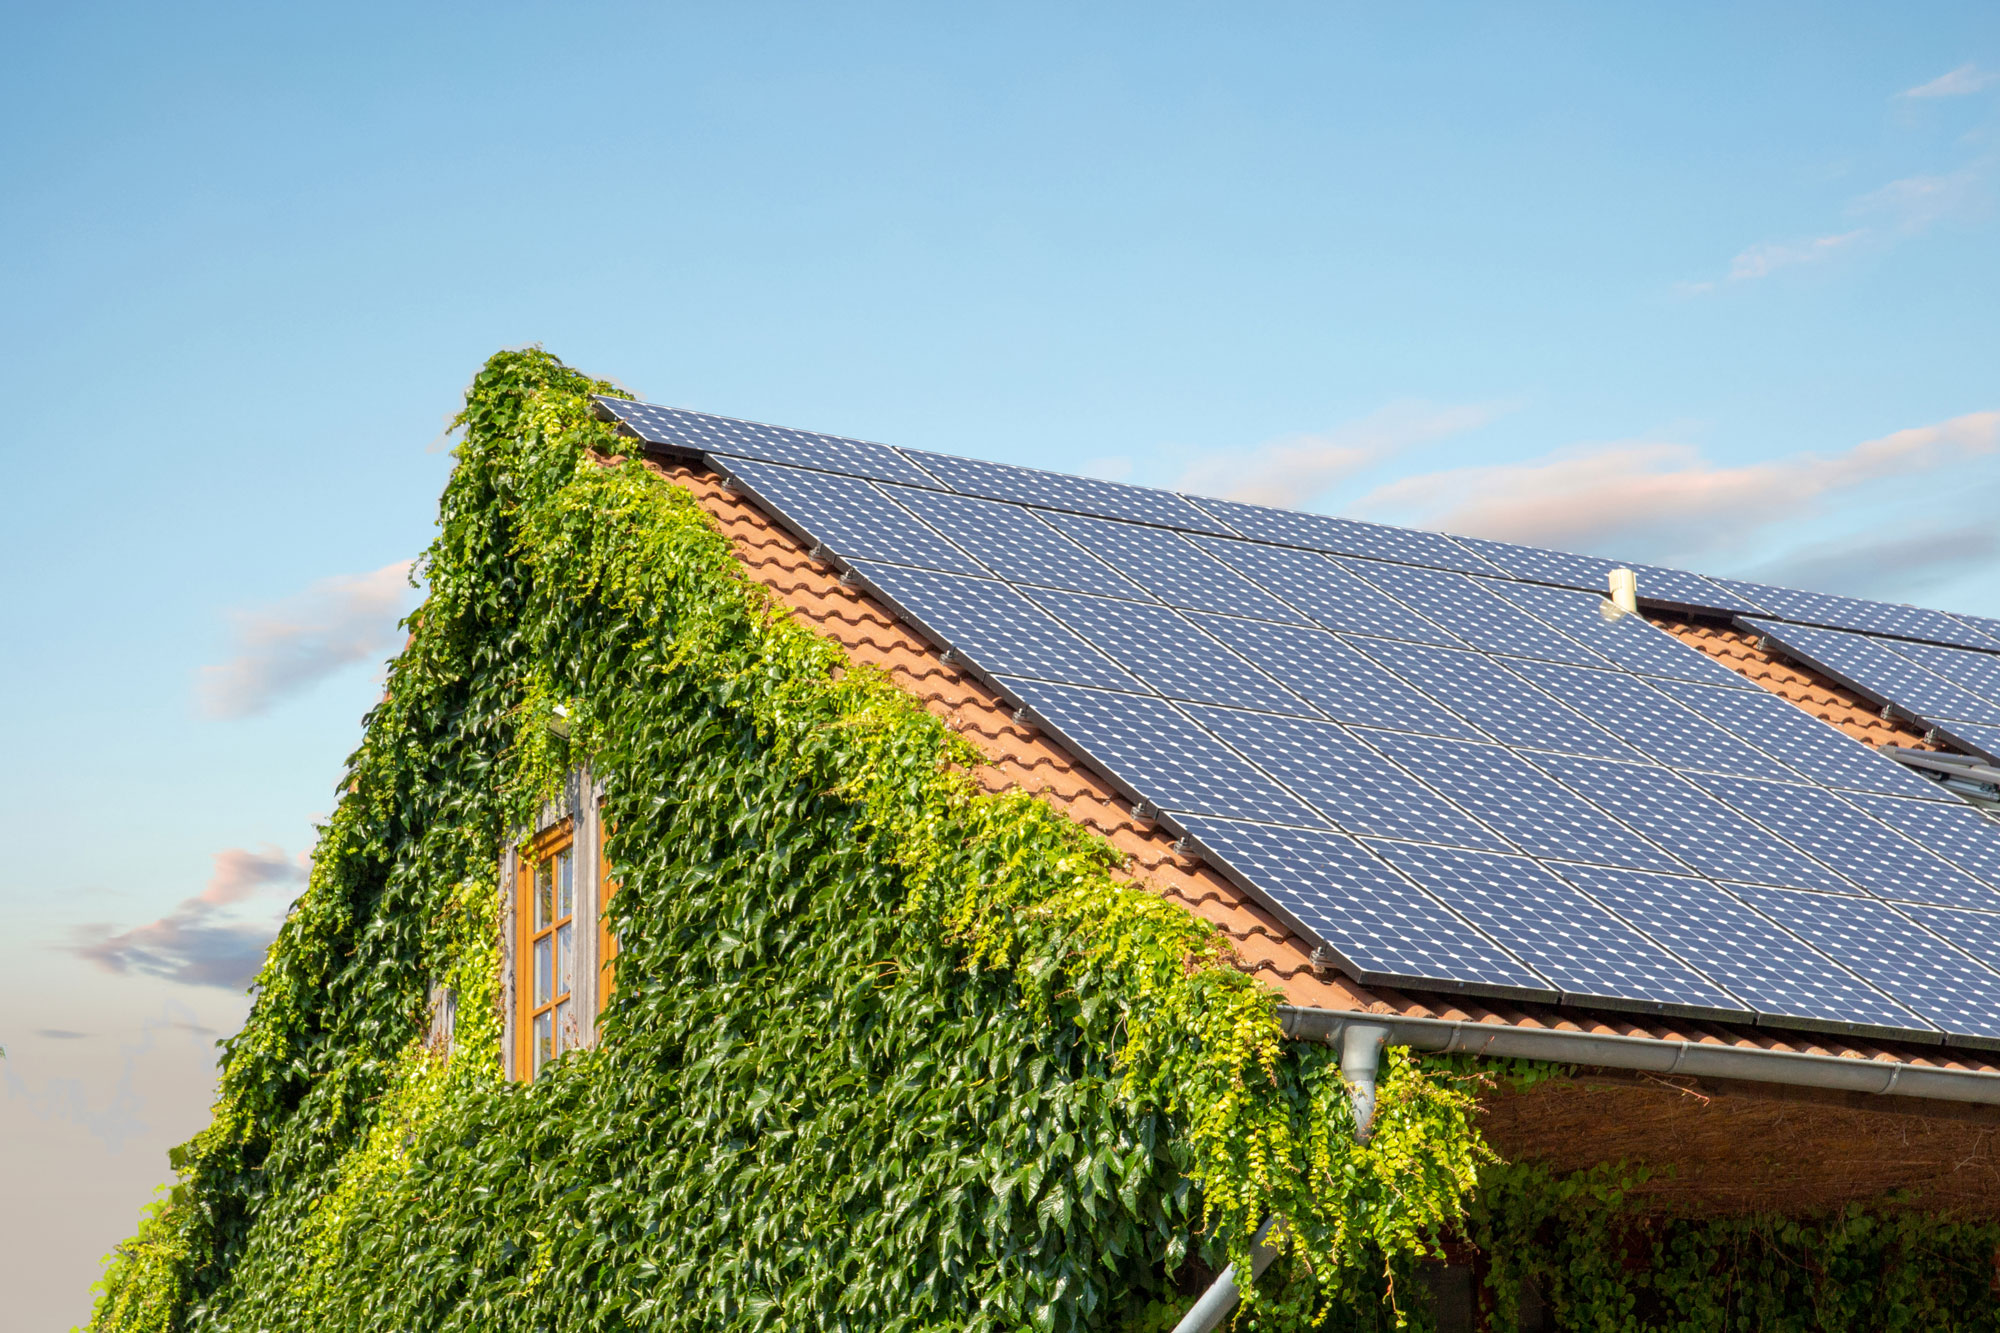 How to produce environmentally friendly solar electricity